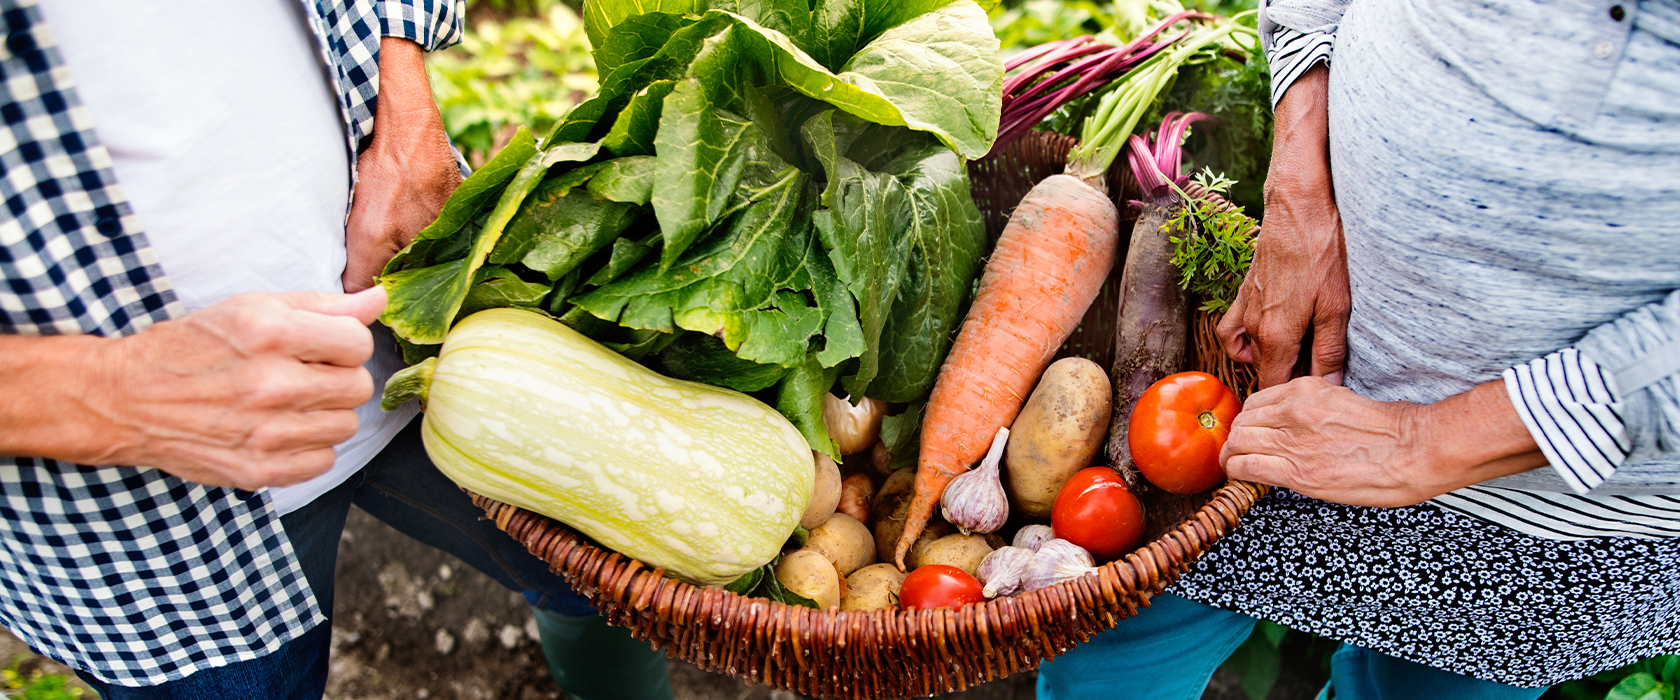 gardening tips for seniors - food and nutrients